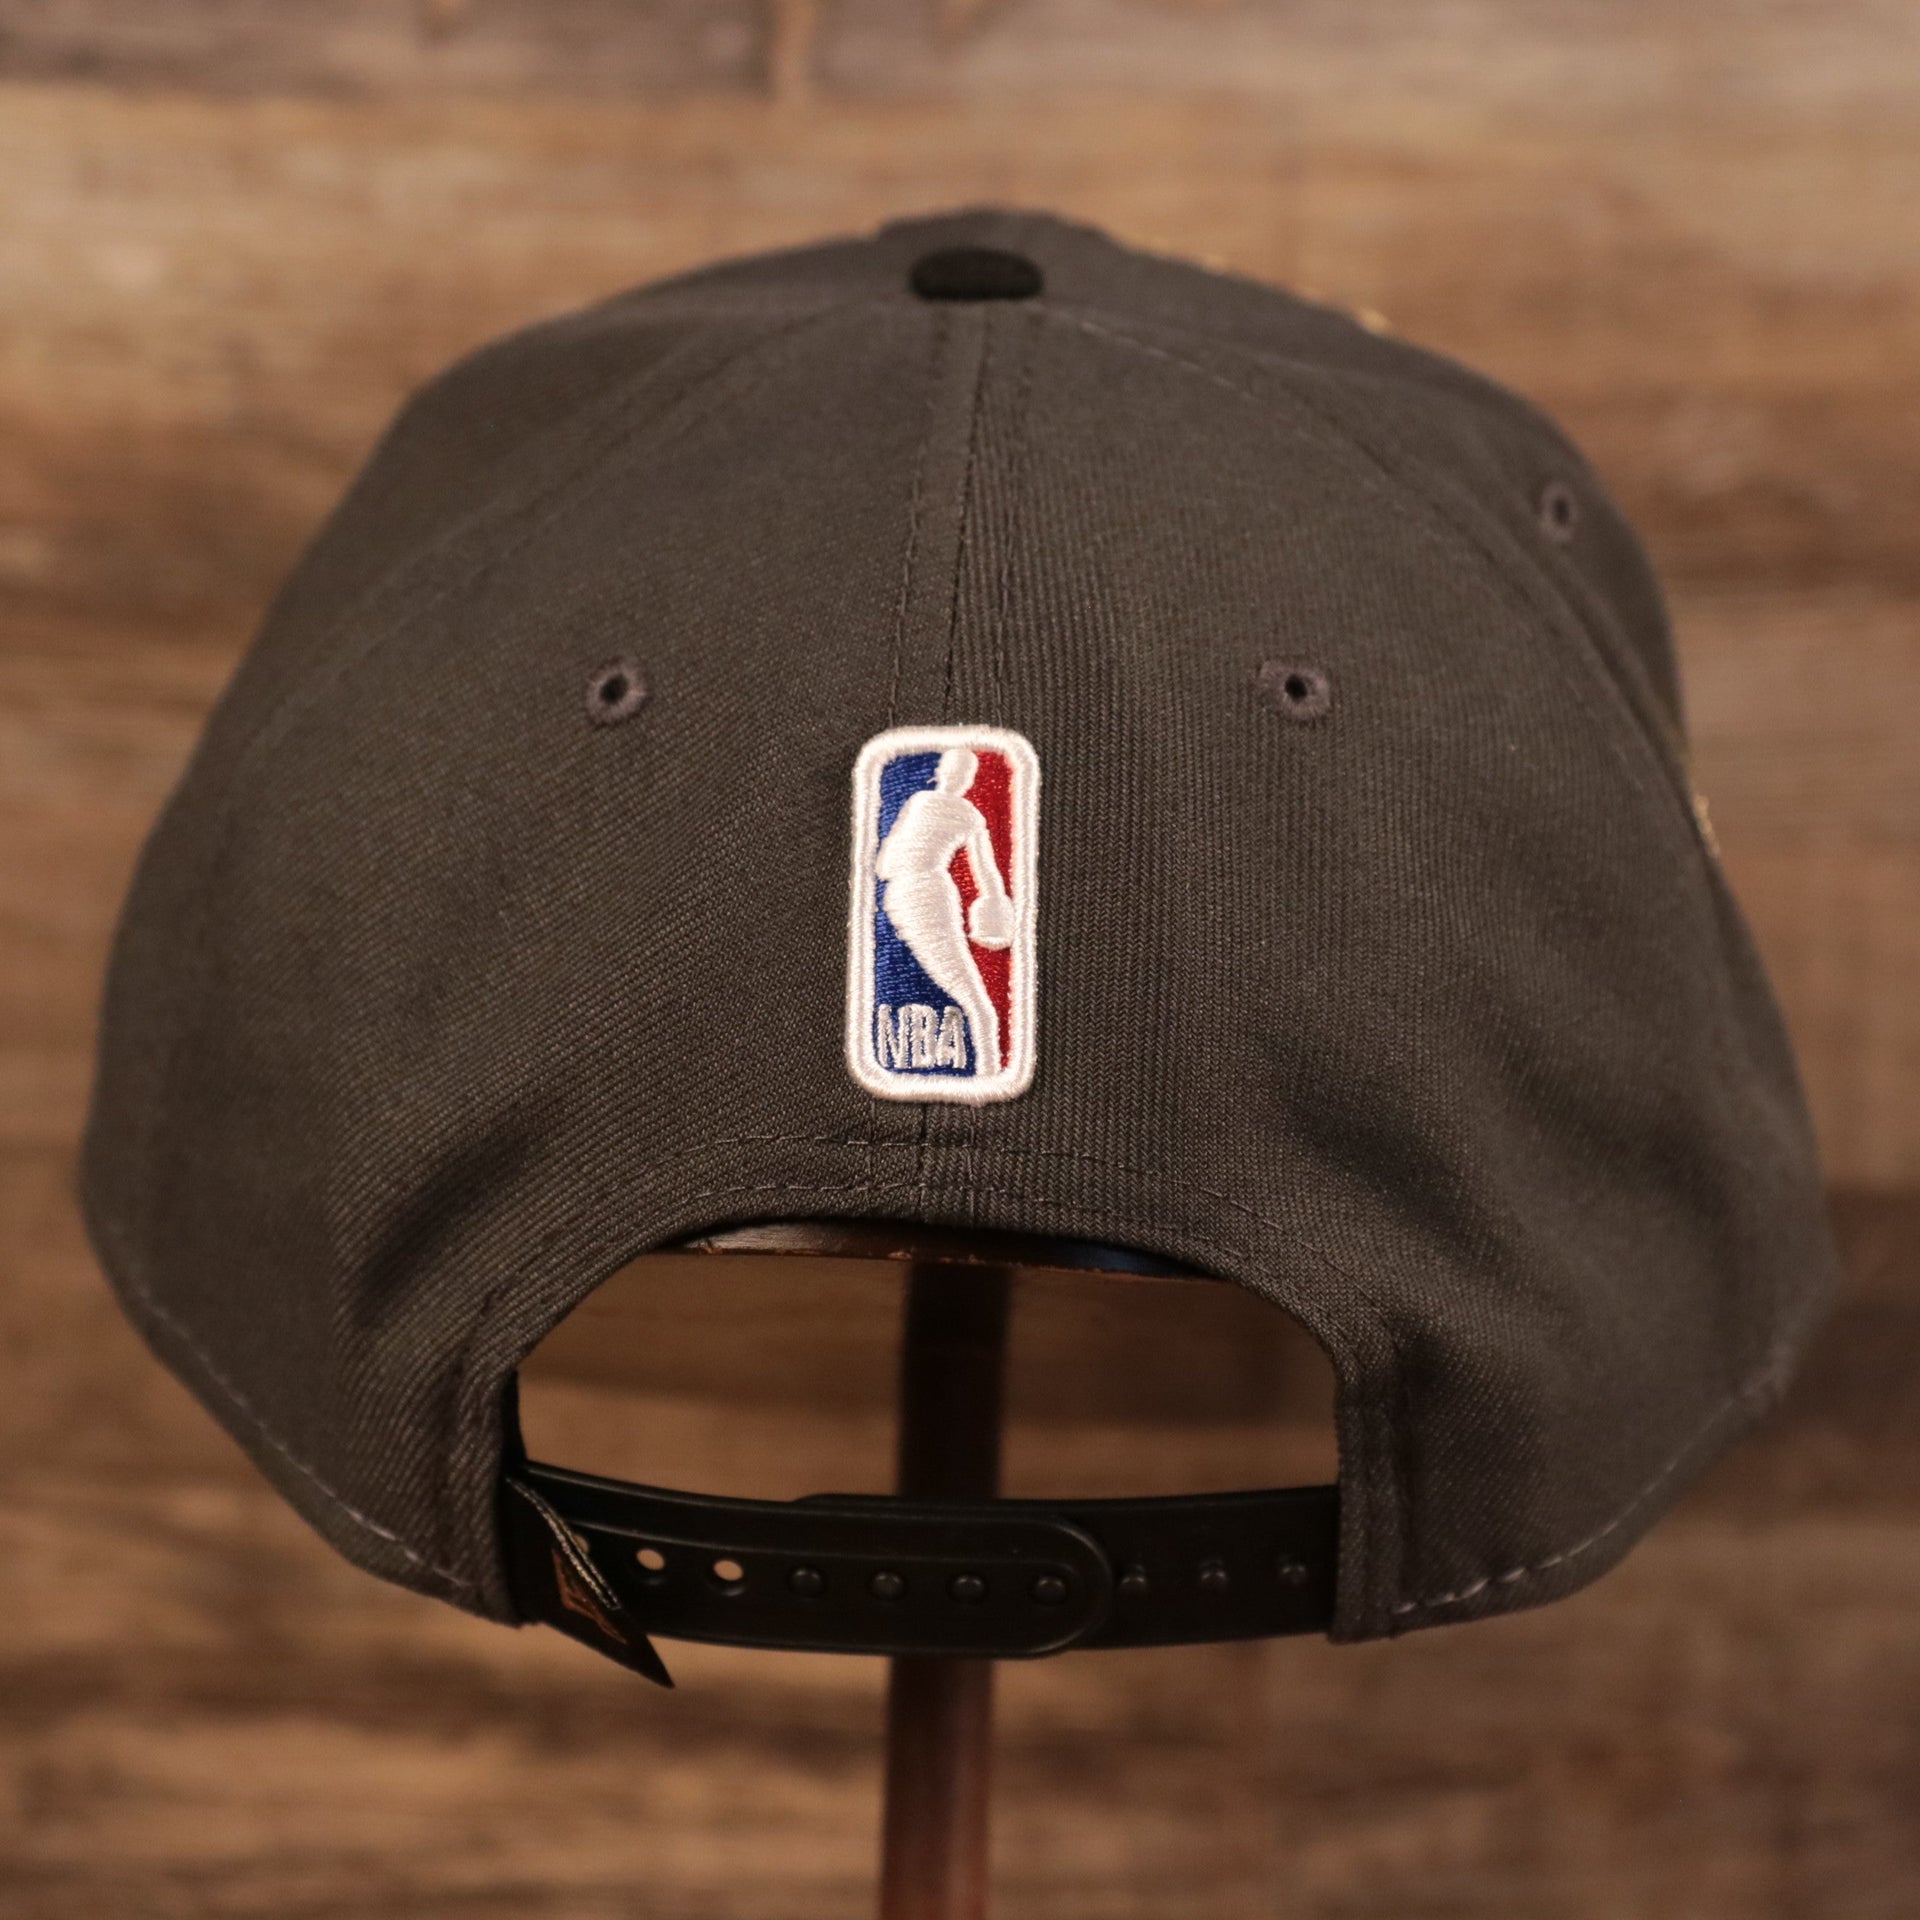 The back of the 2021 NBA Champions Milwaukee Bucks snapback hat which features the Jerry West silhouette NBA logo above an adjustable snap